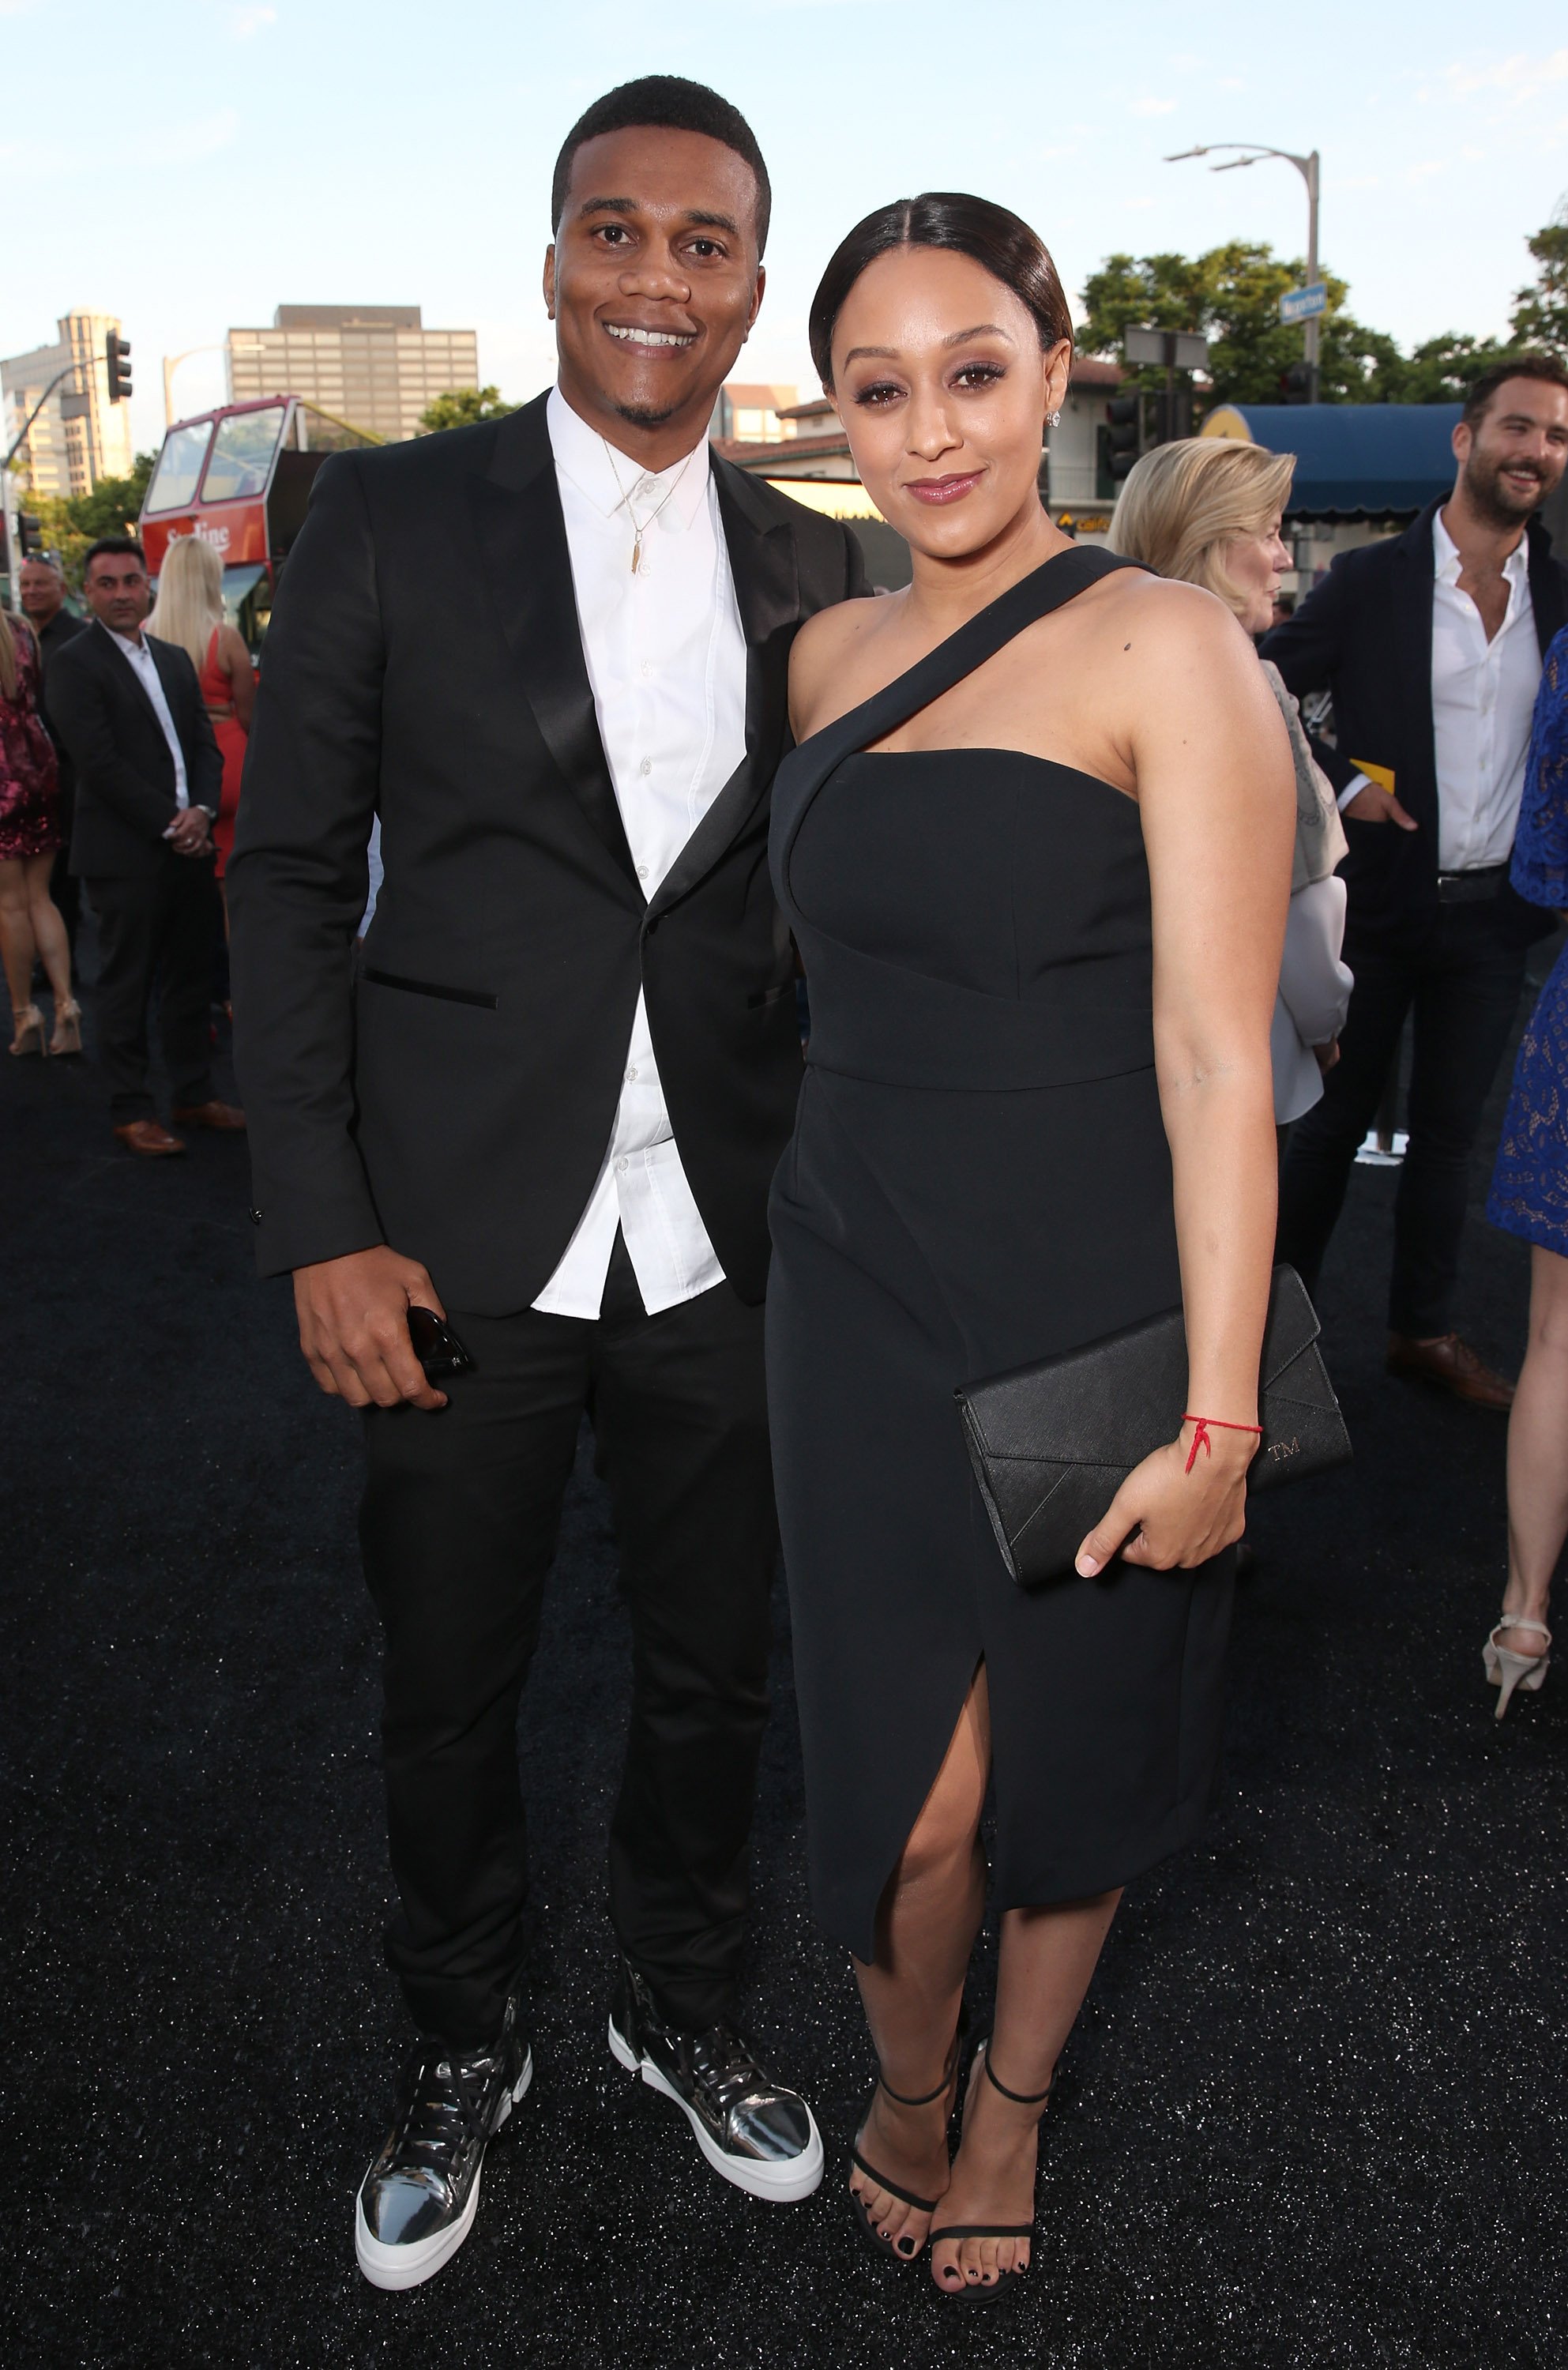 Cory Hardrict & Tia Mowry-Hardrict at the premiere Of "Central Intelligence" on June 10, 2016 in California | Photo: Getty Images